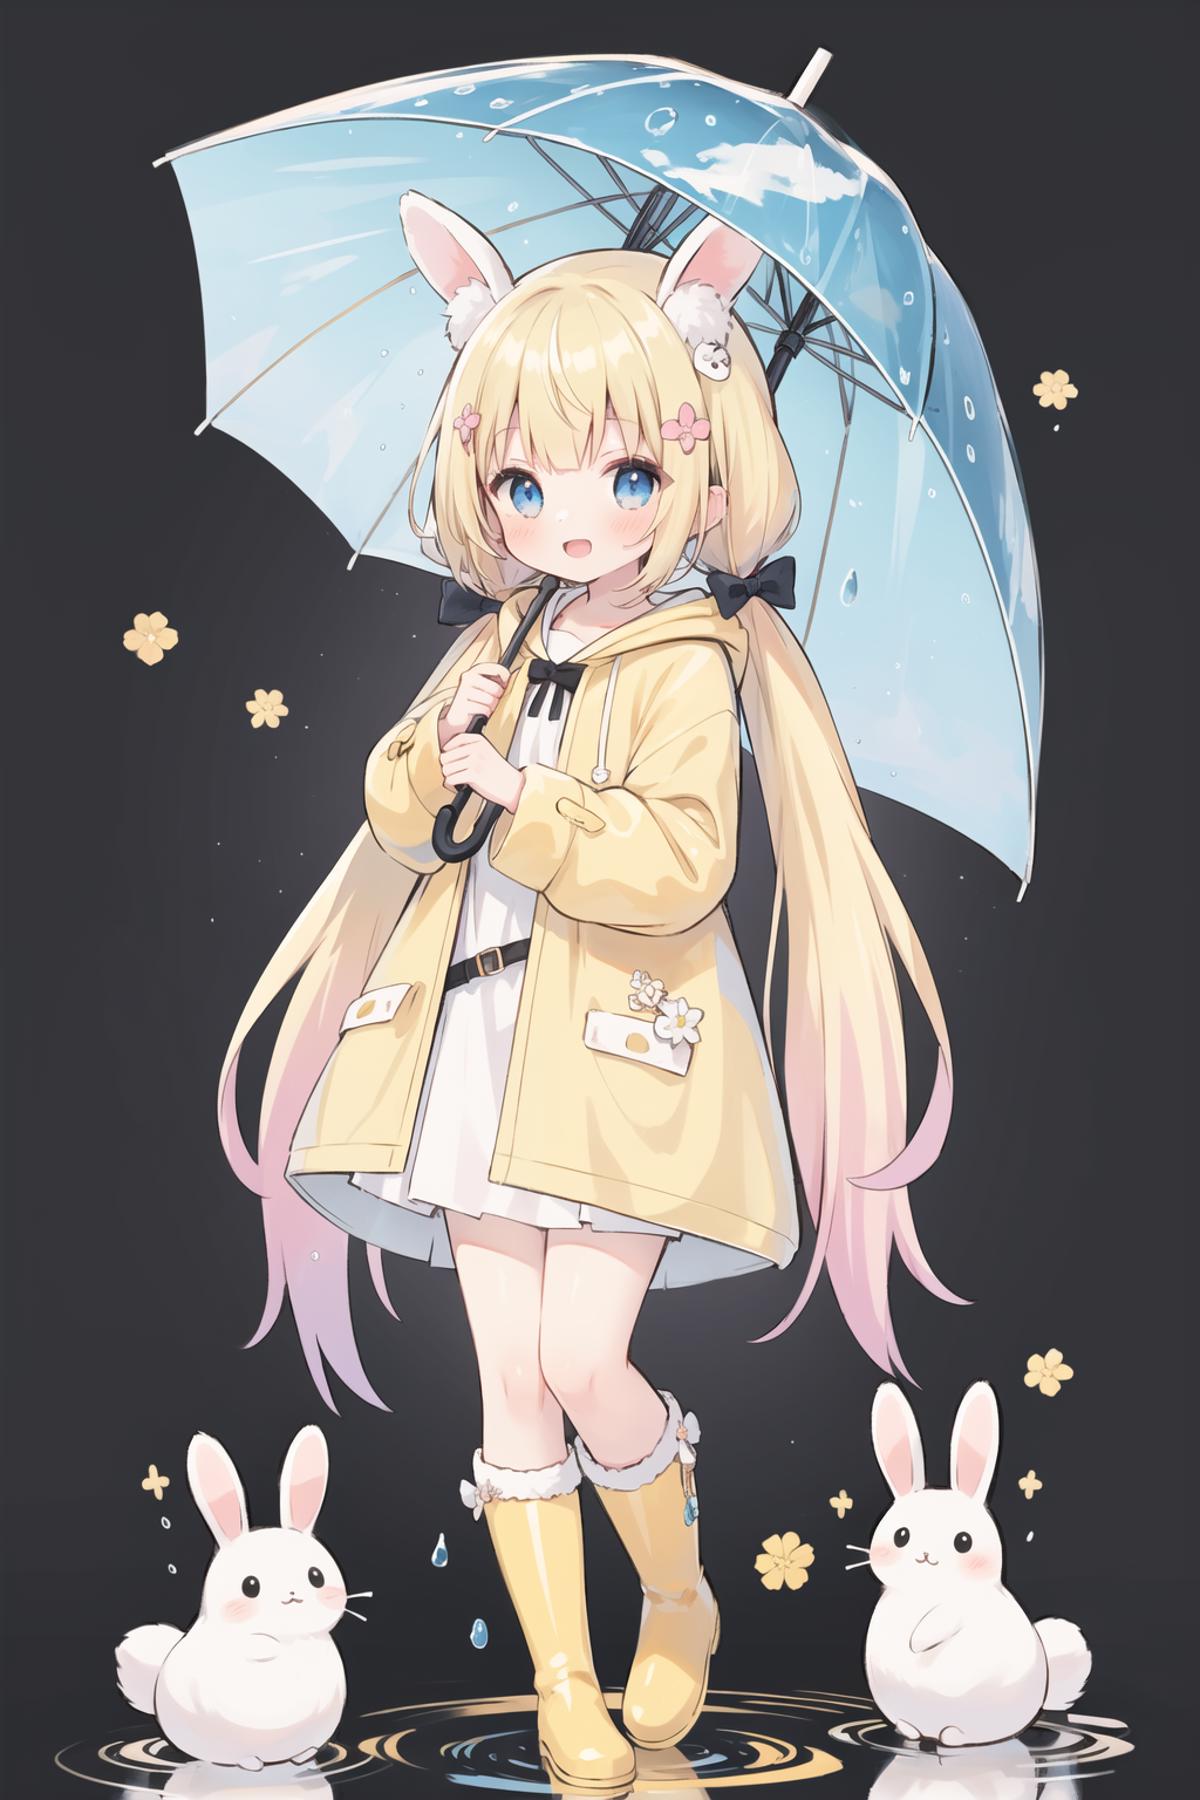 A cute cartoon girl with blonde hair, a blue jacket, and yellow boots holding an umbrella.